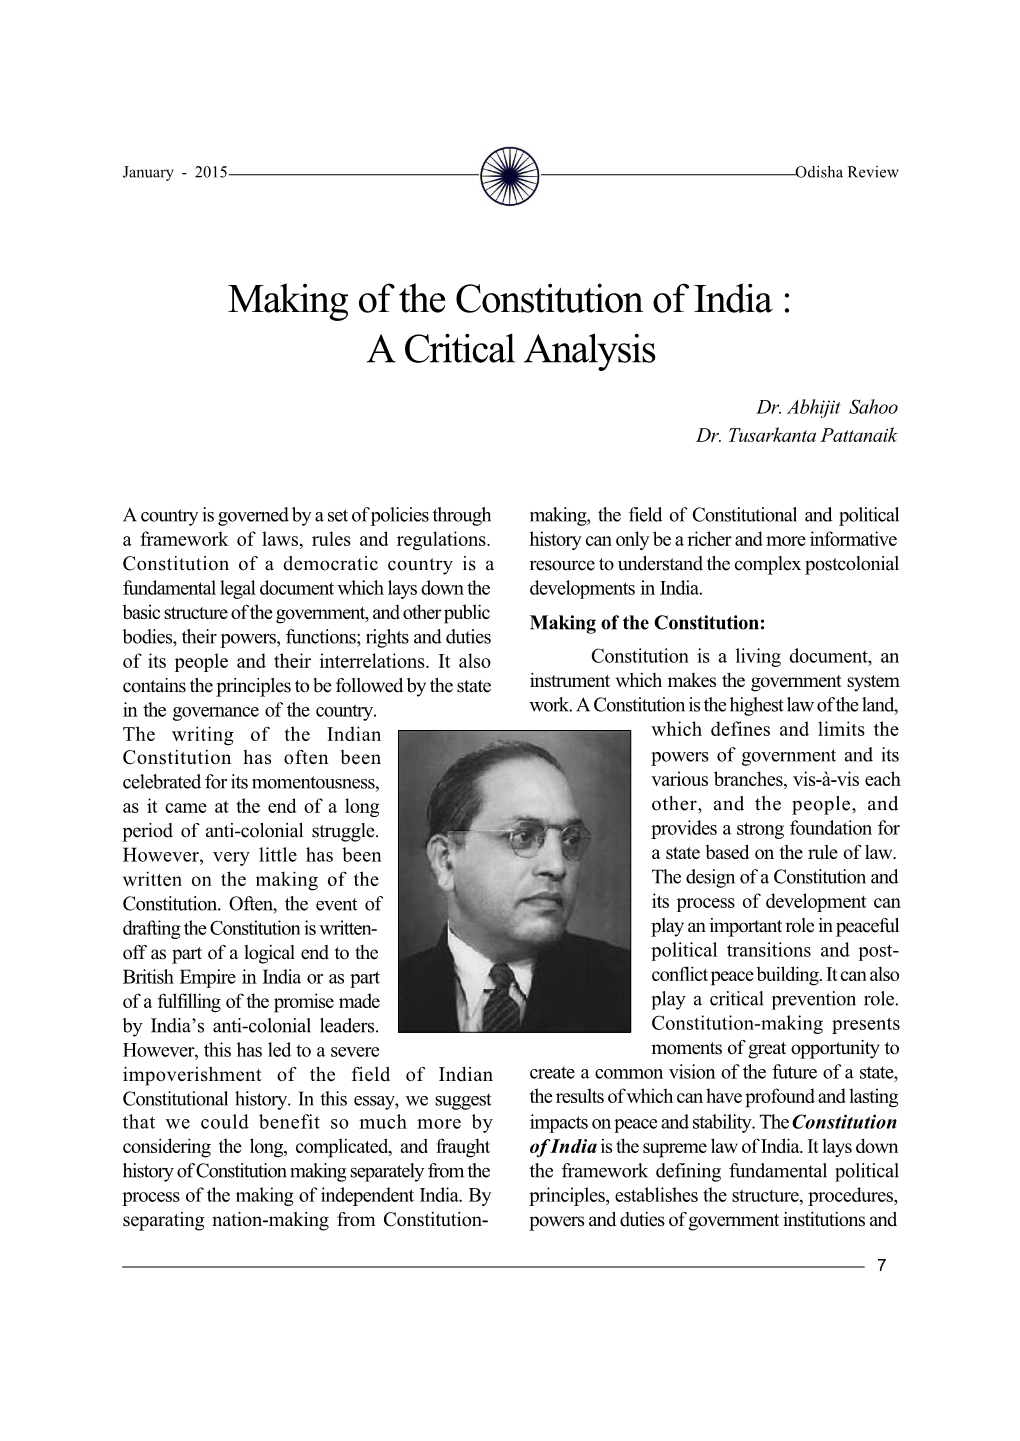 Making of the Constitution of India : a Critical Analysis